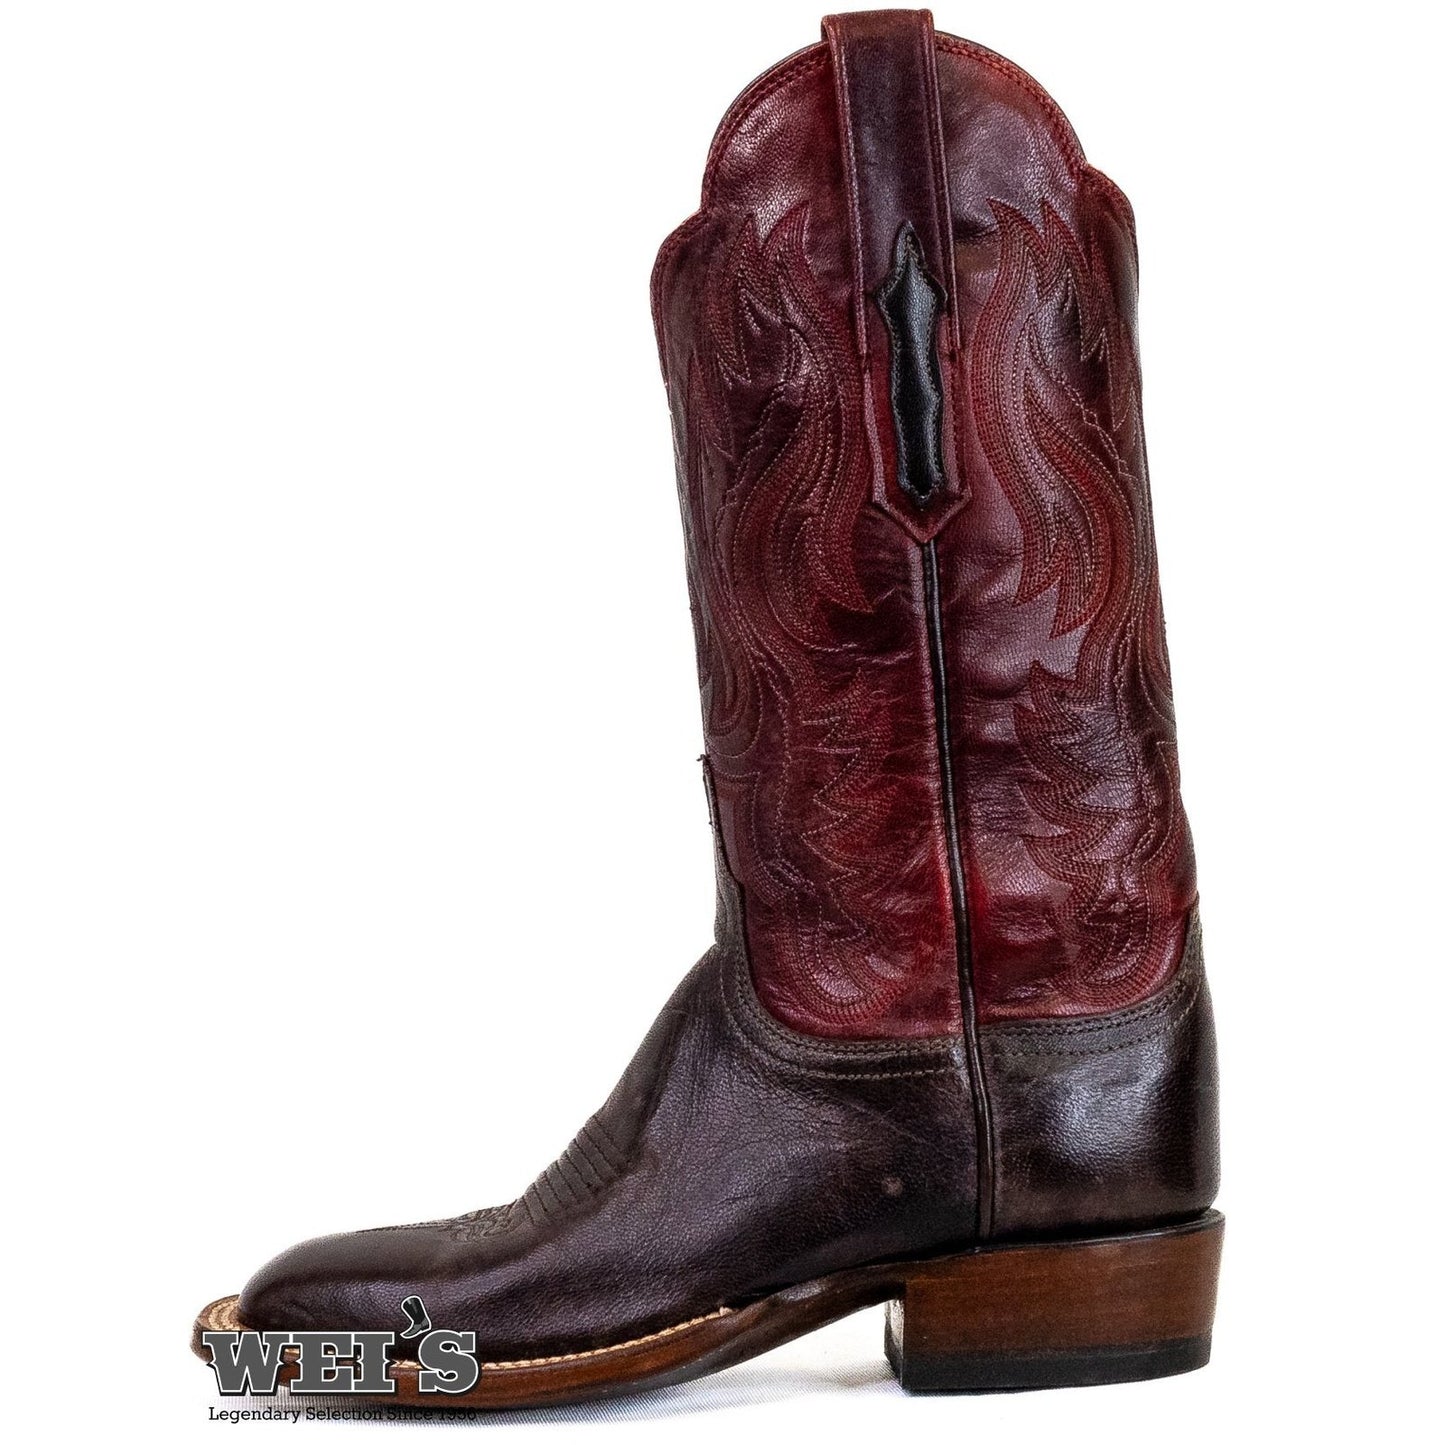 Lucchese Shelby Womens Dark Brown Goat Leather Cowboy Western Boots CL2527.W8 - Clearance